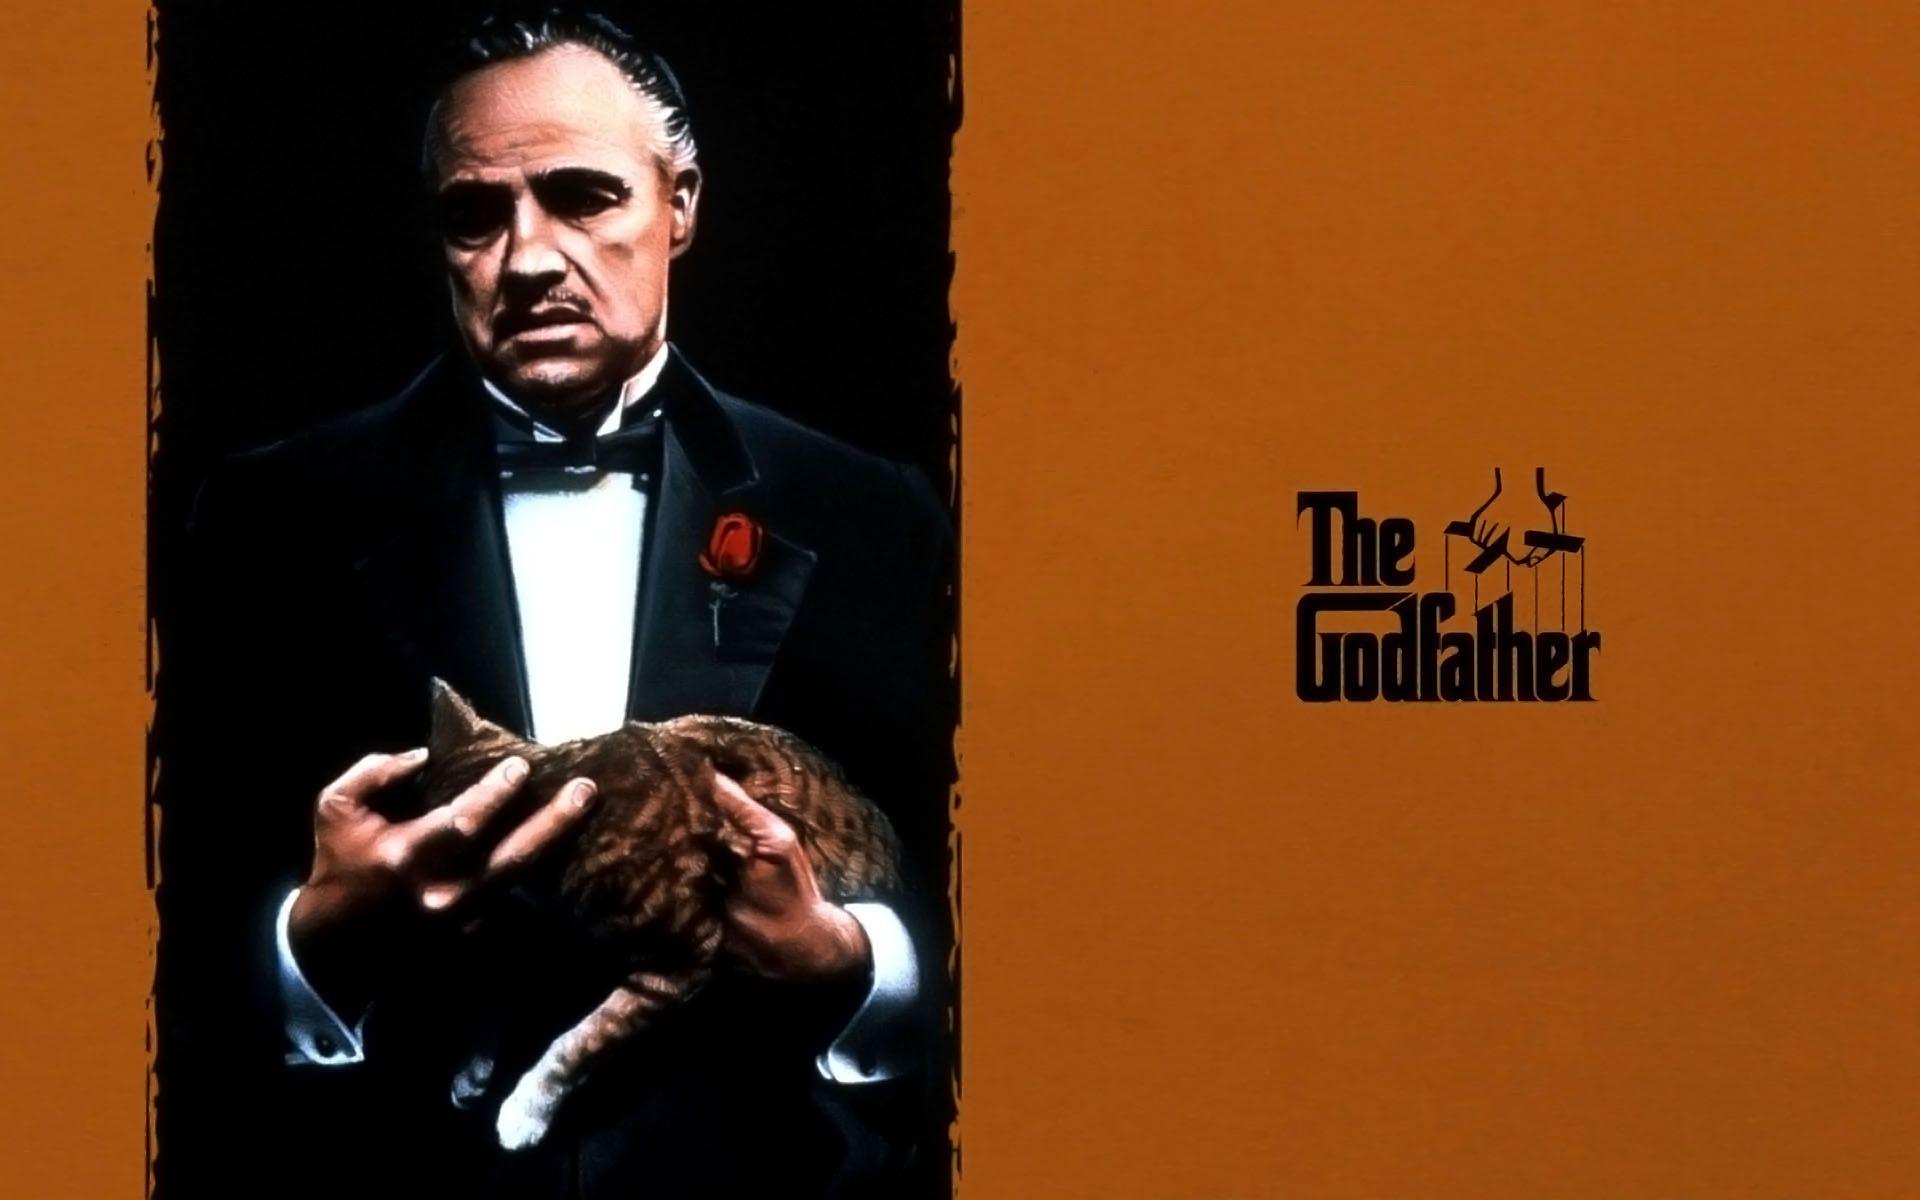 The Godfather quote wallpaper